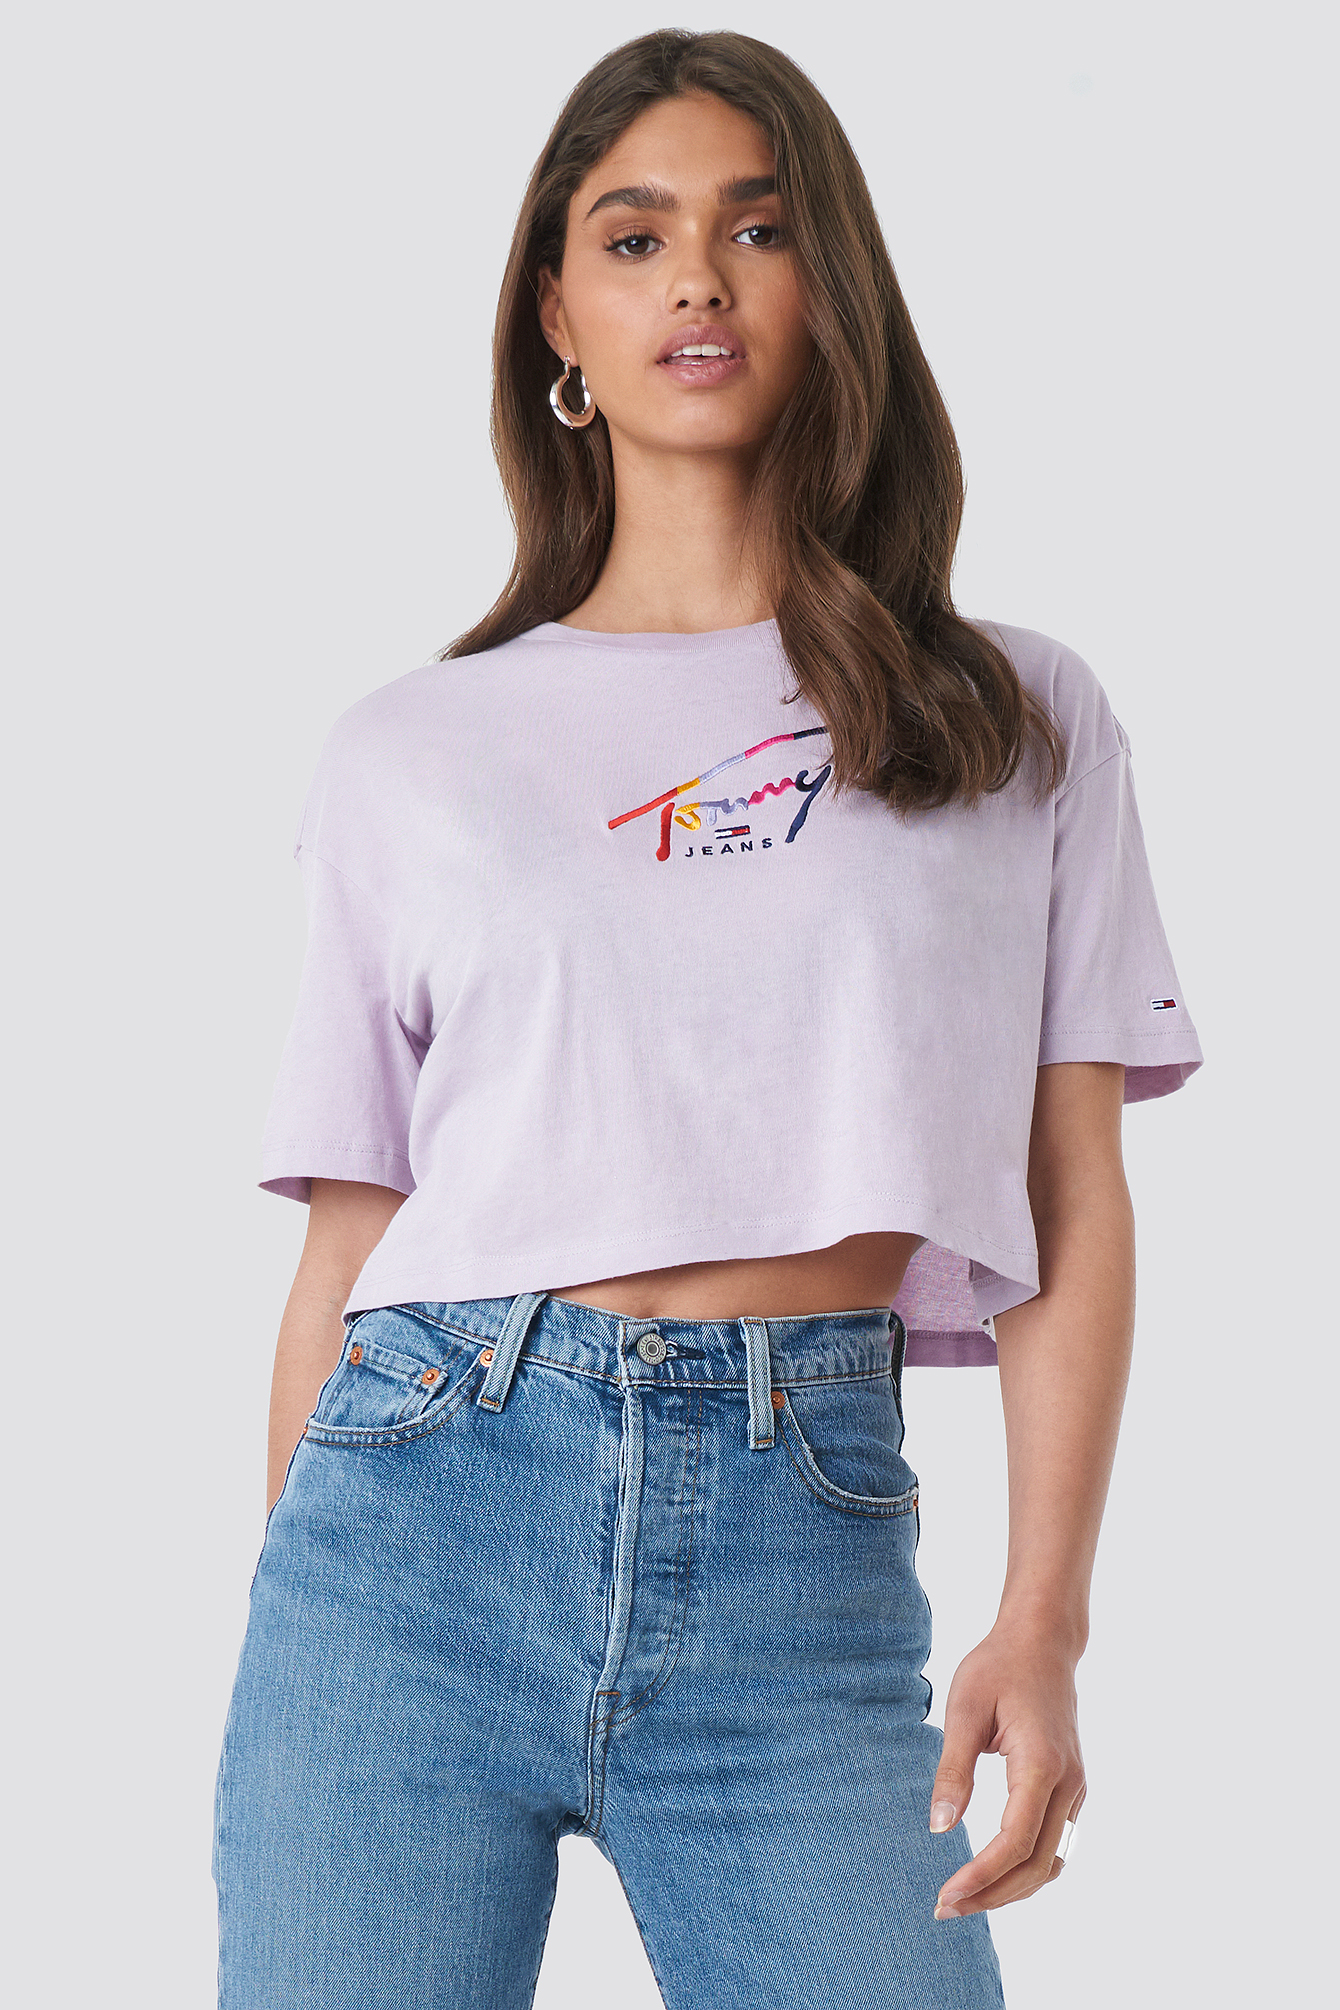 cropped tommy